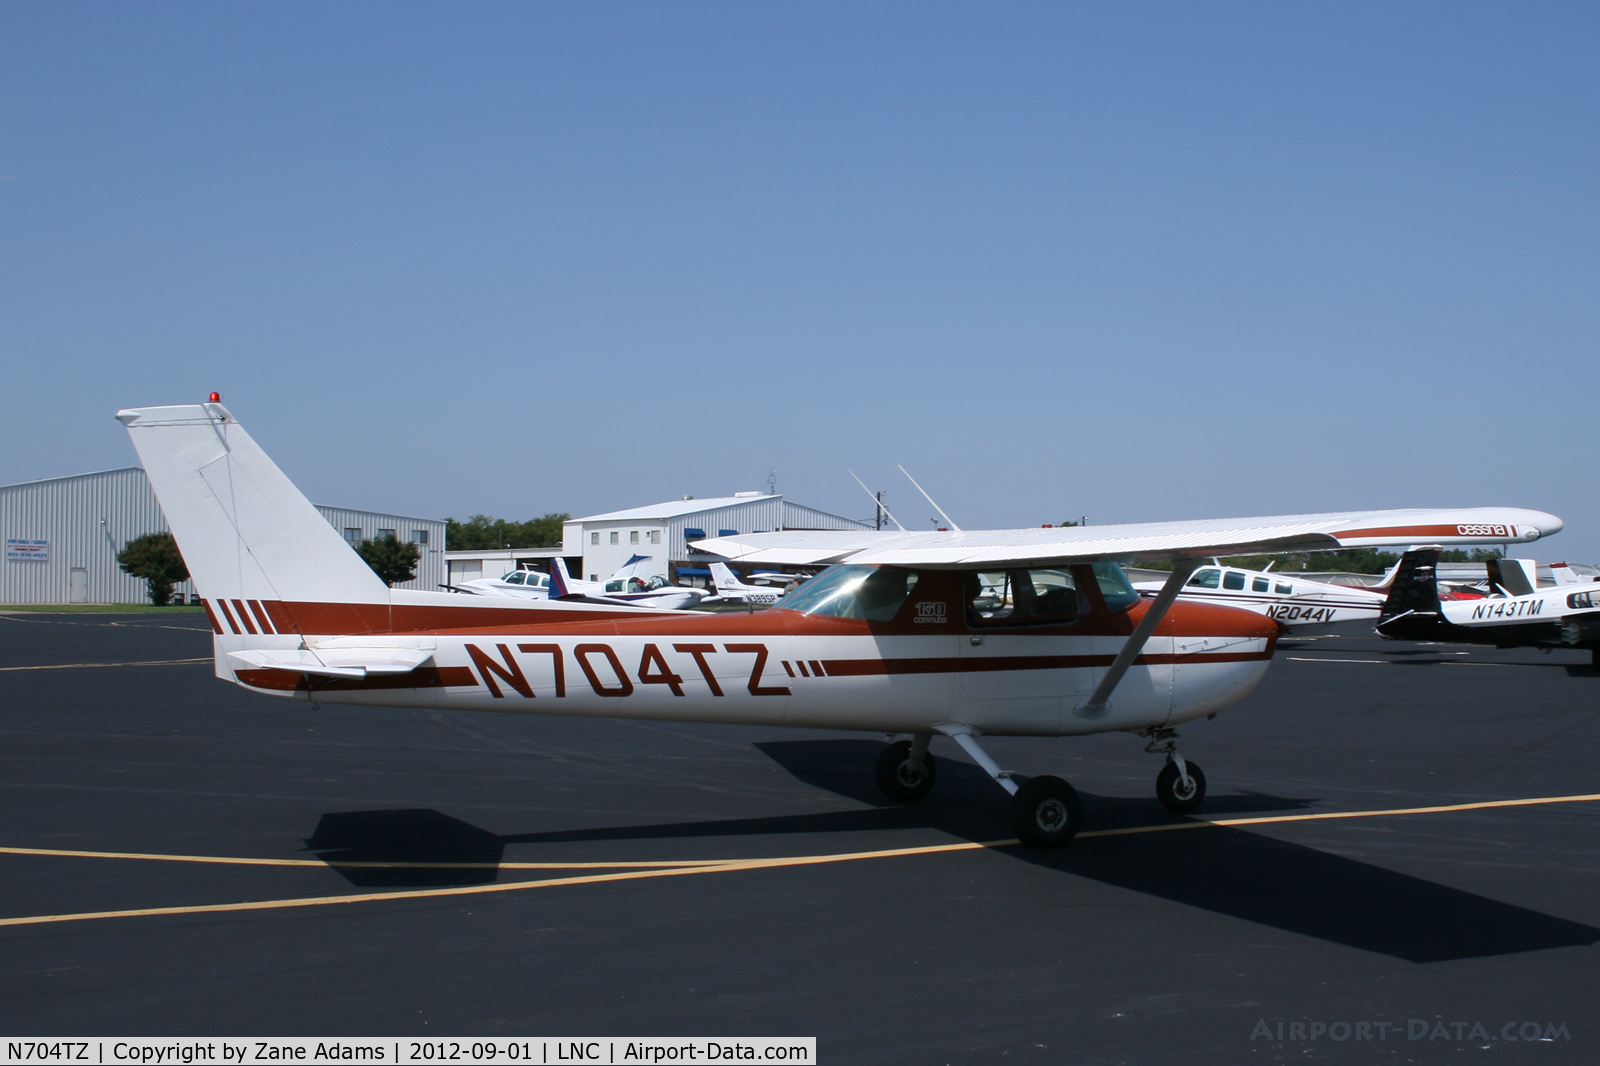 N704TZ, 1976 Cessna 150M C/N 15078873, On the ramp during Warbirds on Parade 2012 at Lancaster Airport